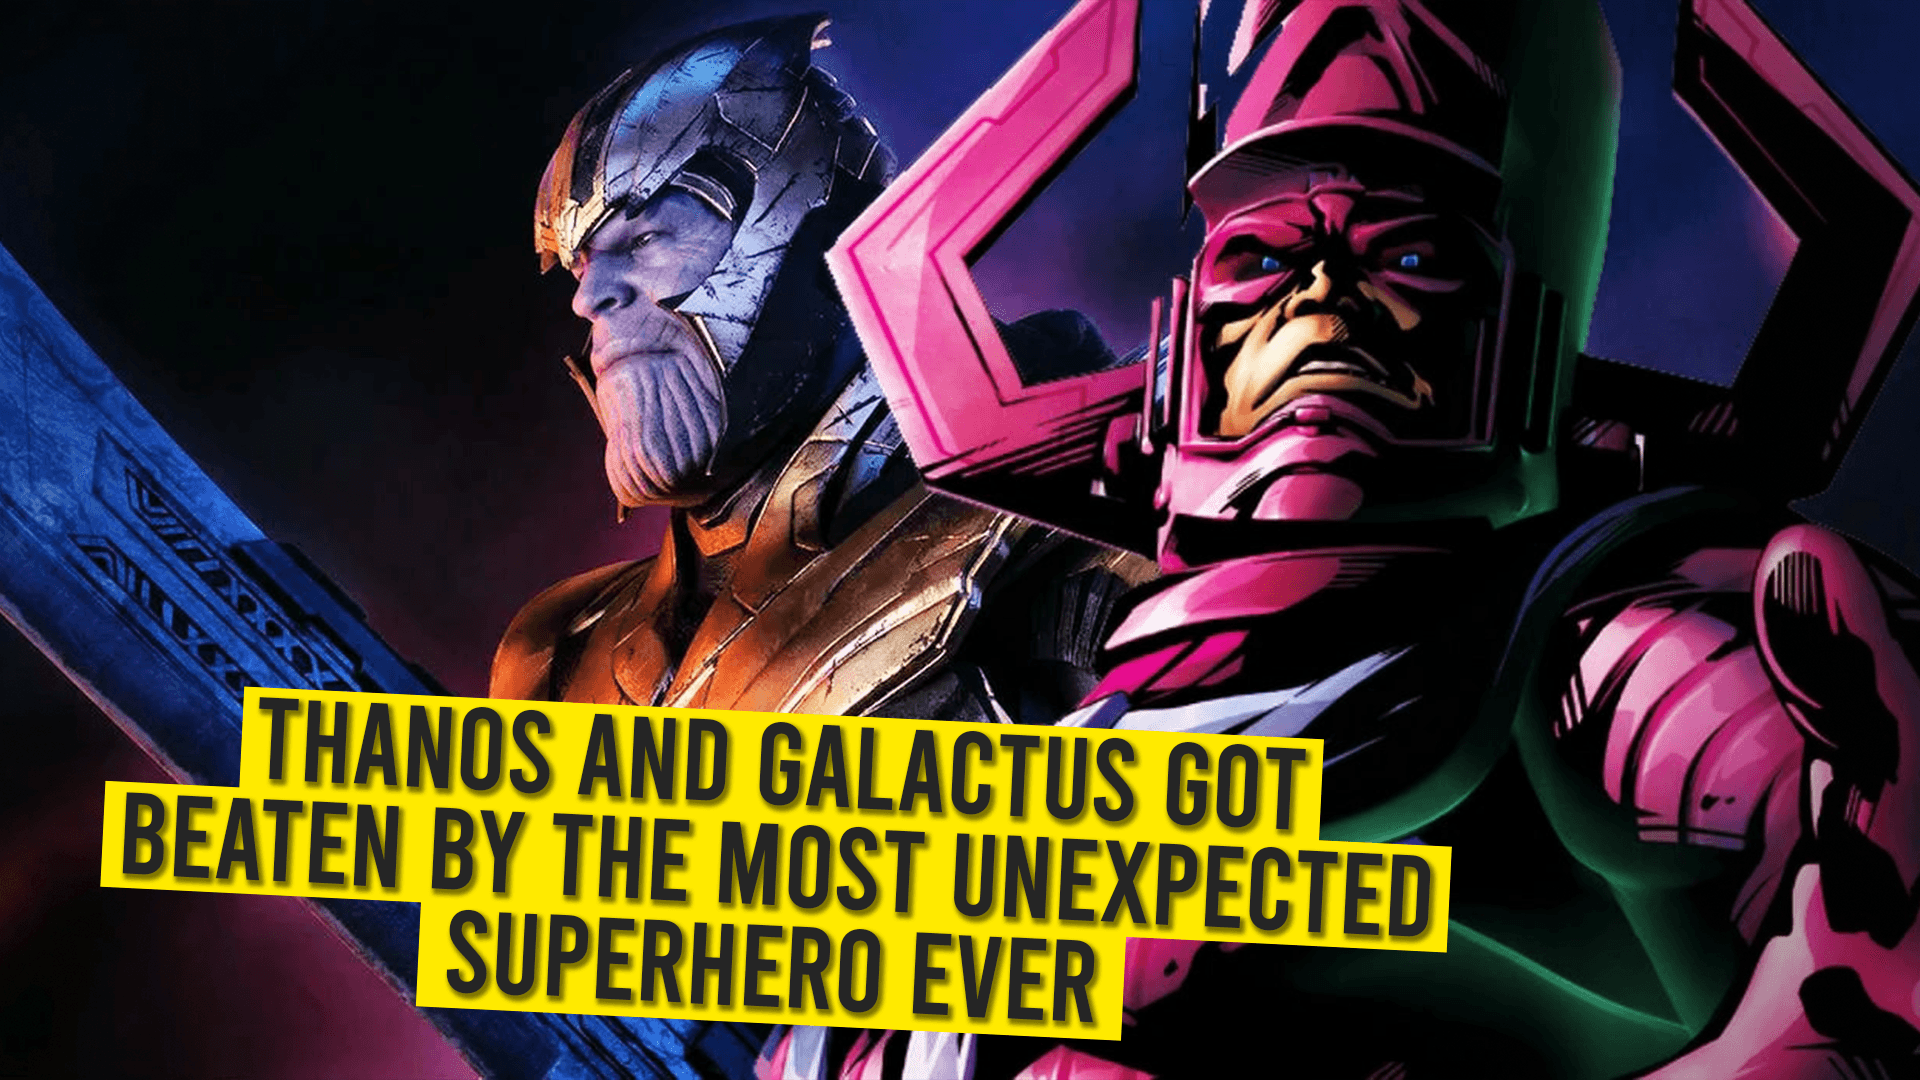 Thanos And Galactus Got Beaten By The Most Unexpected Superhero Ever